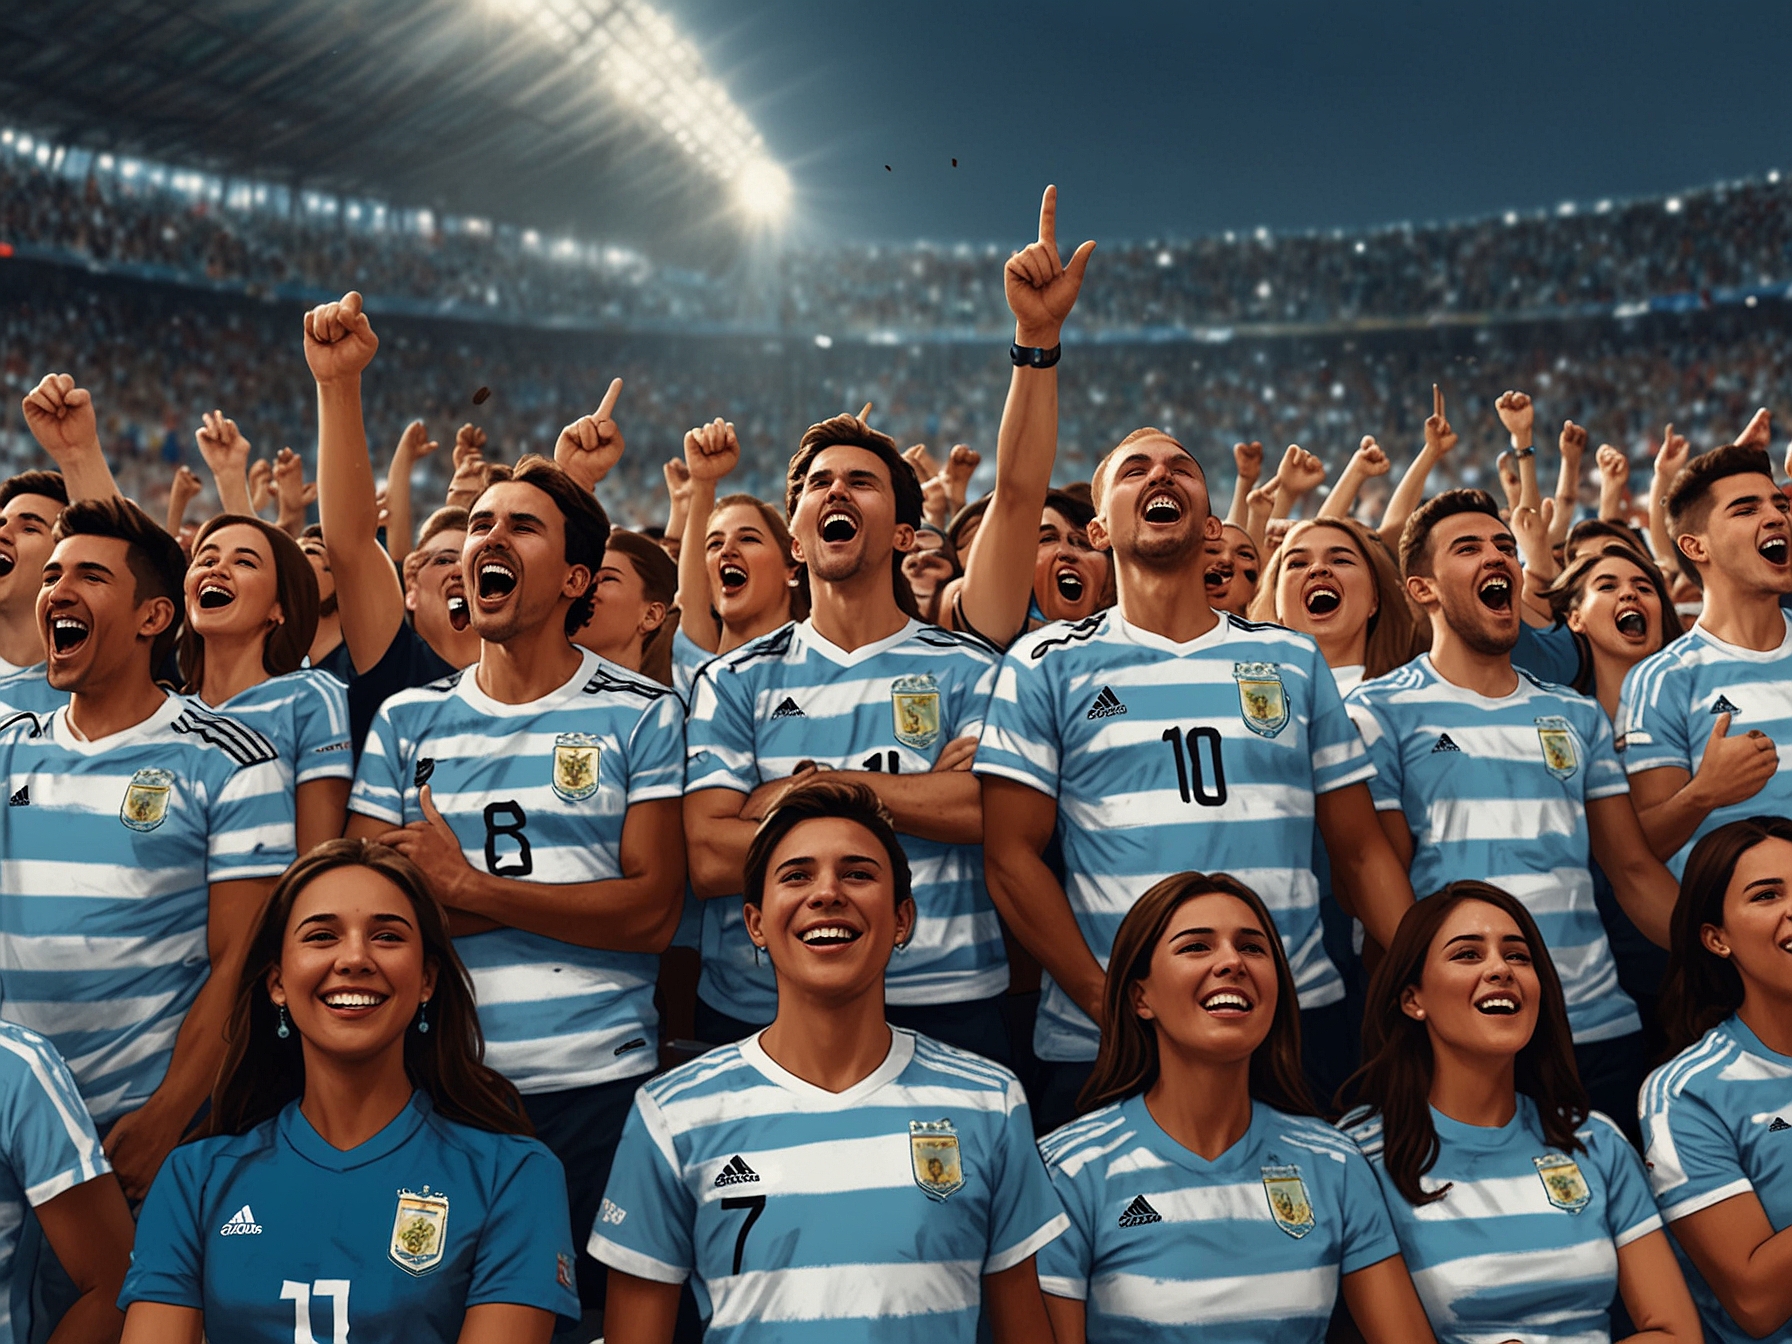 The packed stadium buzzes with excitement as Argentine fans don light blue and white striped shirts, passionately cheering for their team during the opening match against Canada in Copa America 2024.